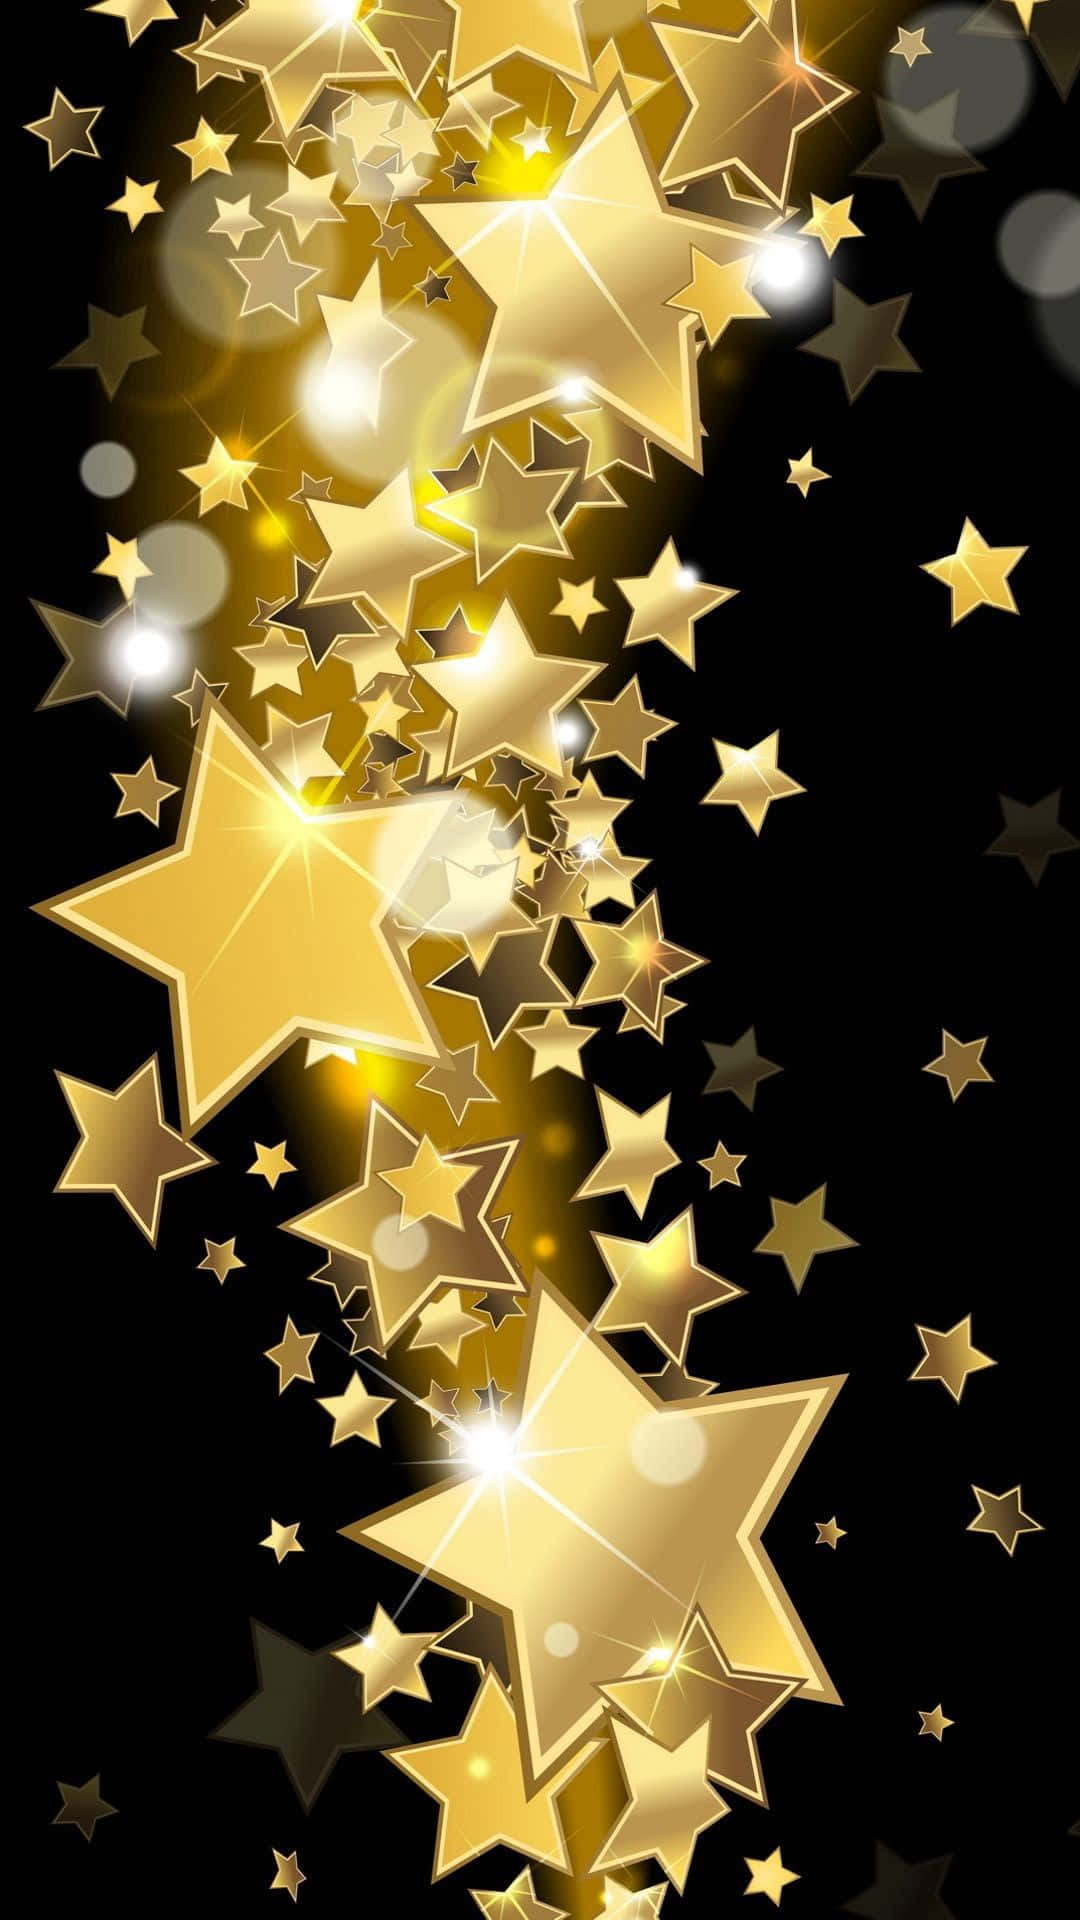 Shine Brightly with Gold Stars Wallpaper